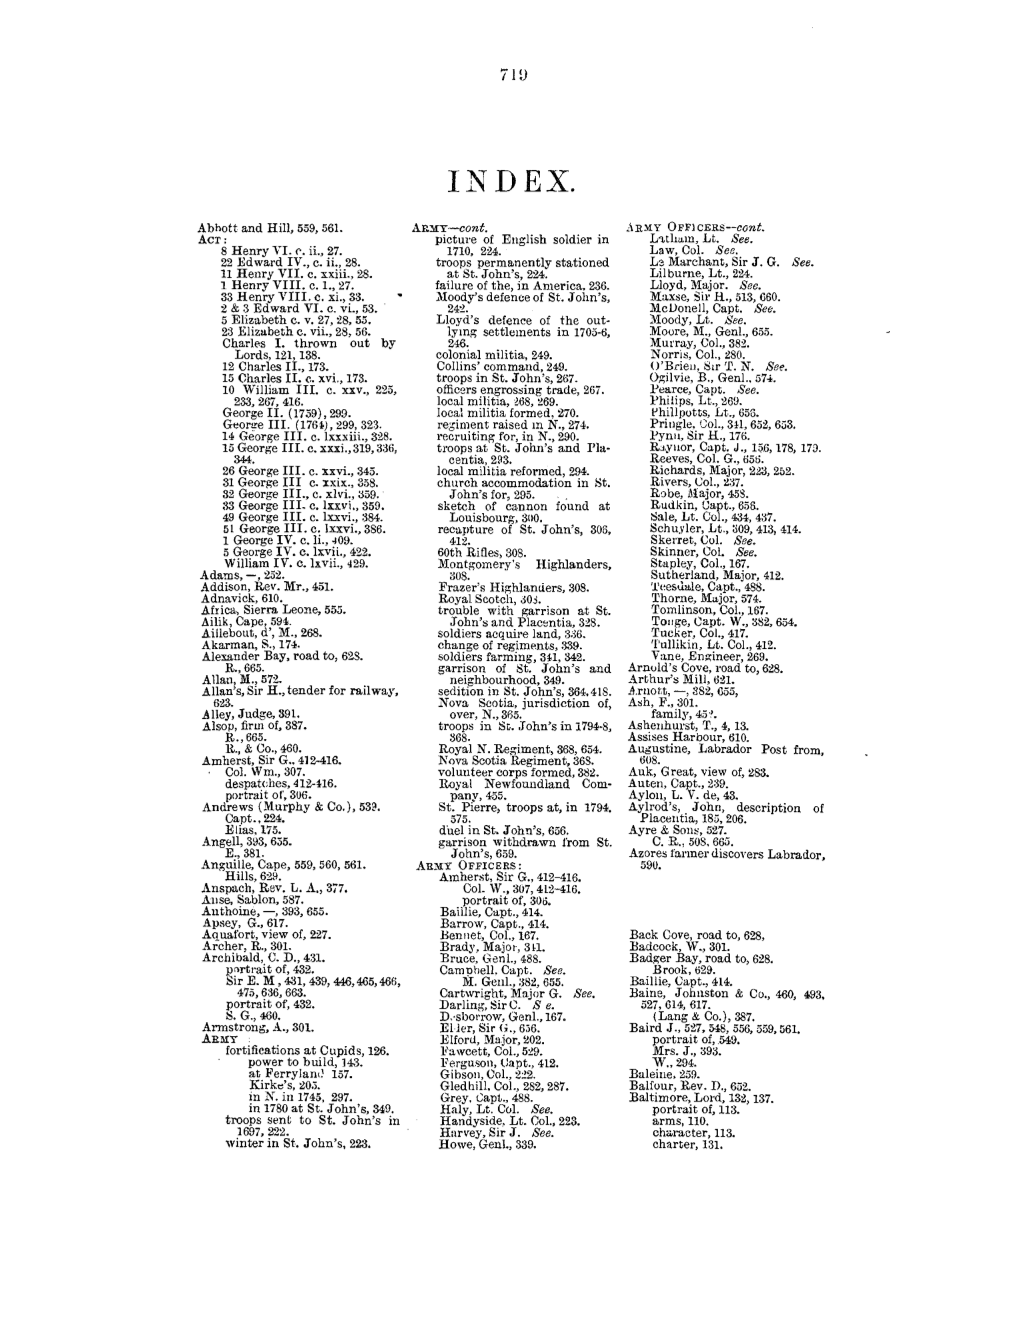 To View the Index